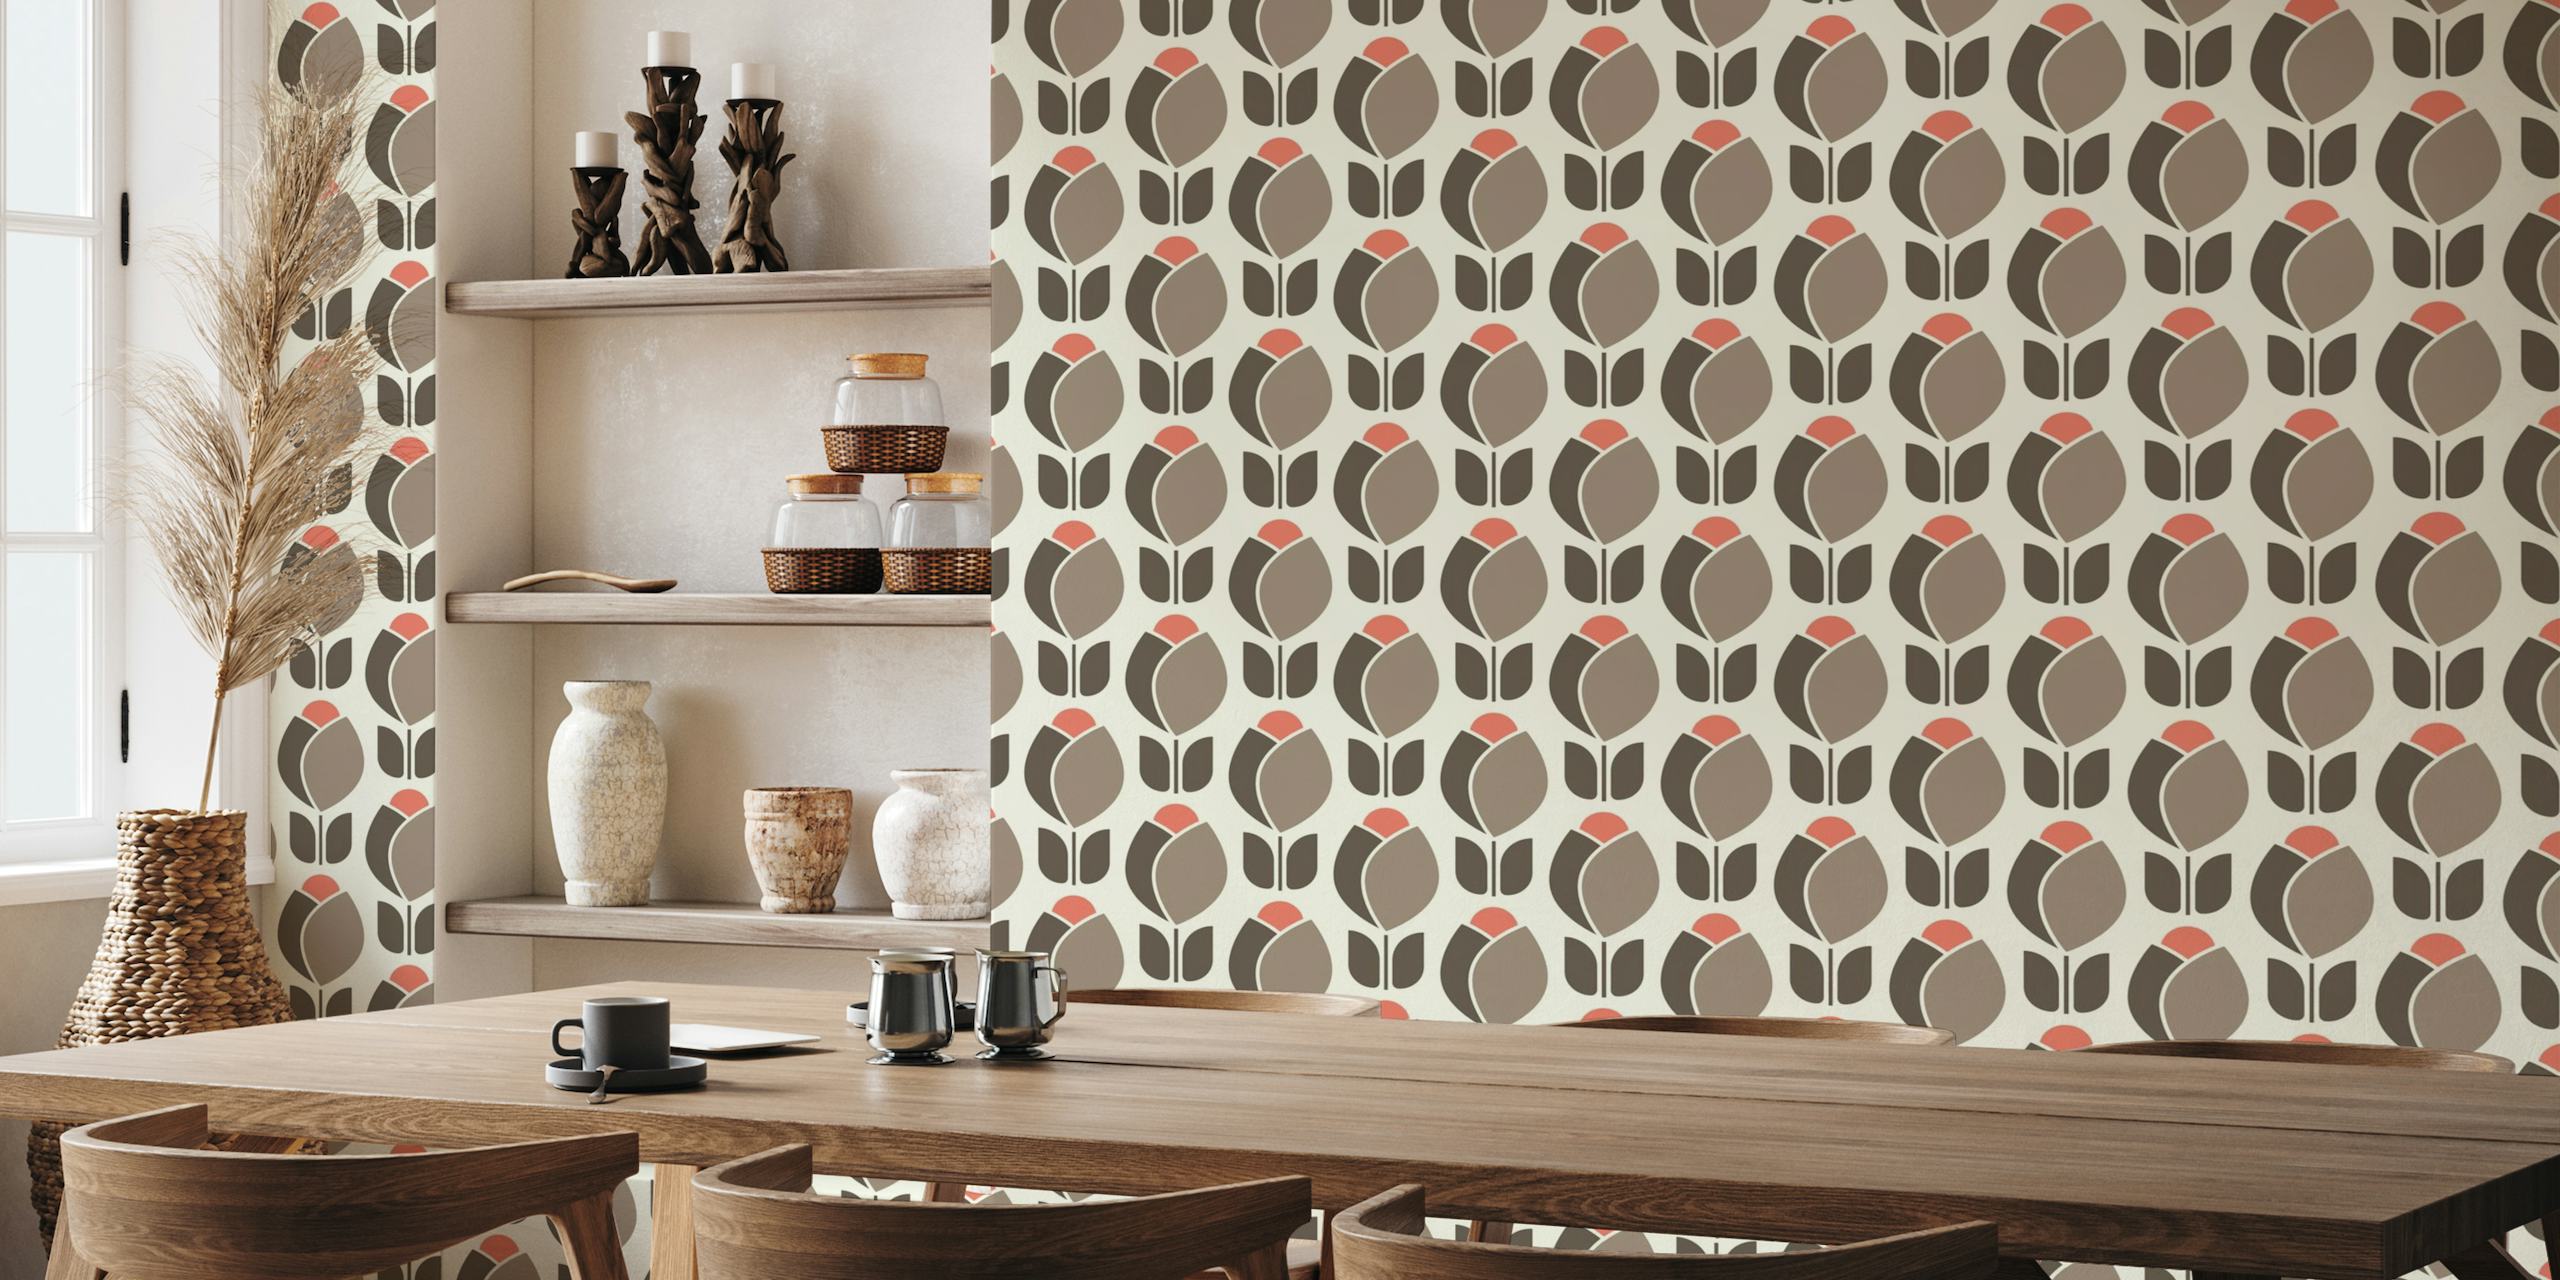 Retro brown and beige tulip pattern wall mural with dashes of pink